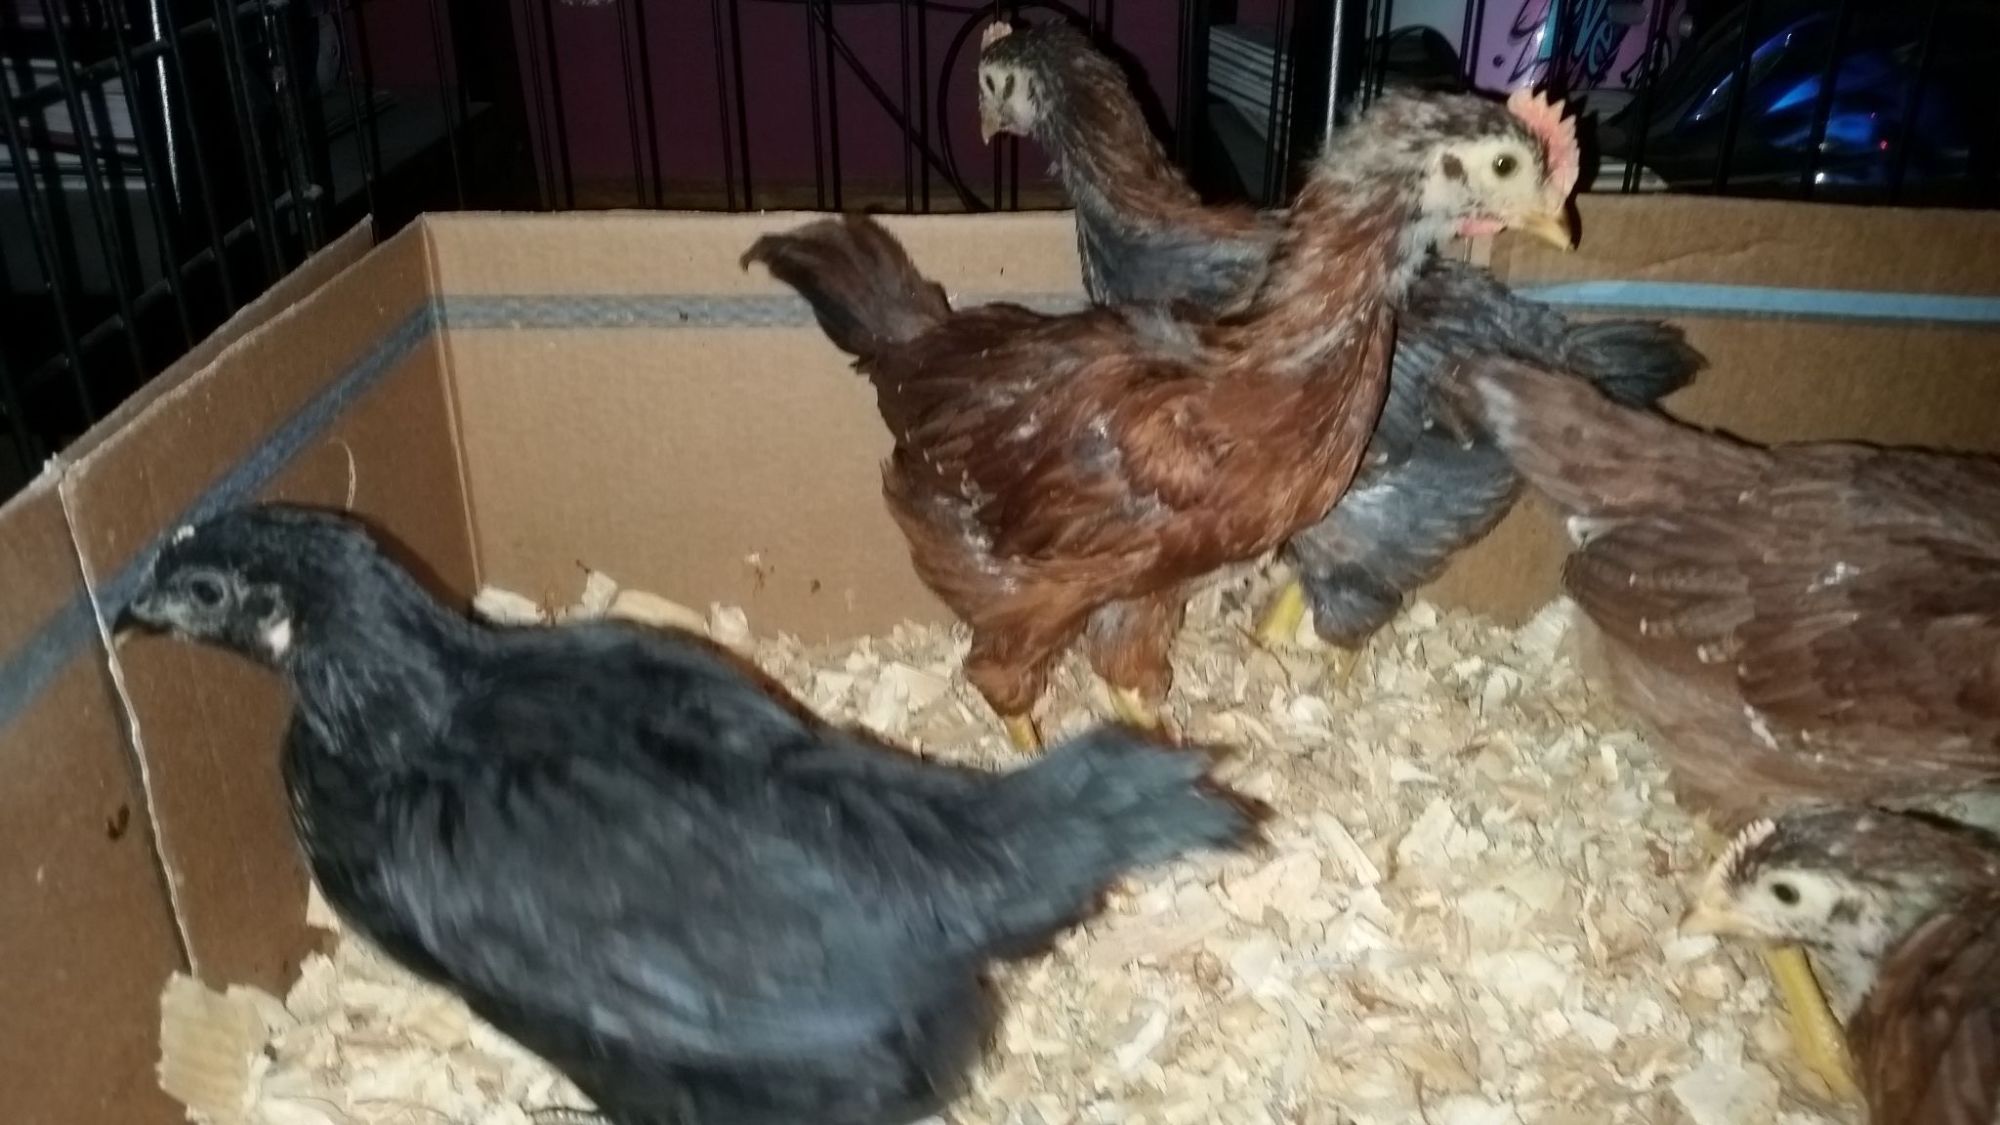 My 5 week old chicks ready to go into their new home tomorrow. Black Star and French Wheaton Maran x RIR.